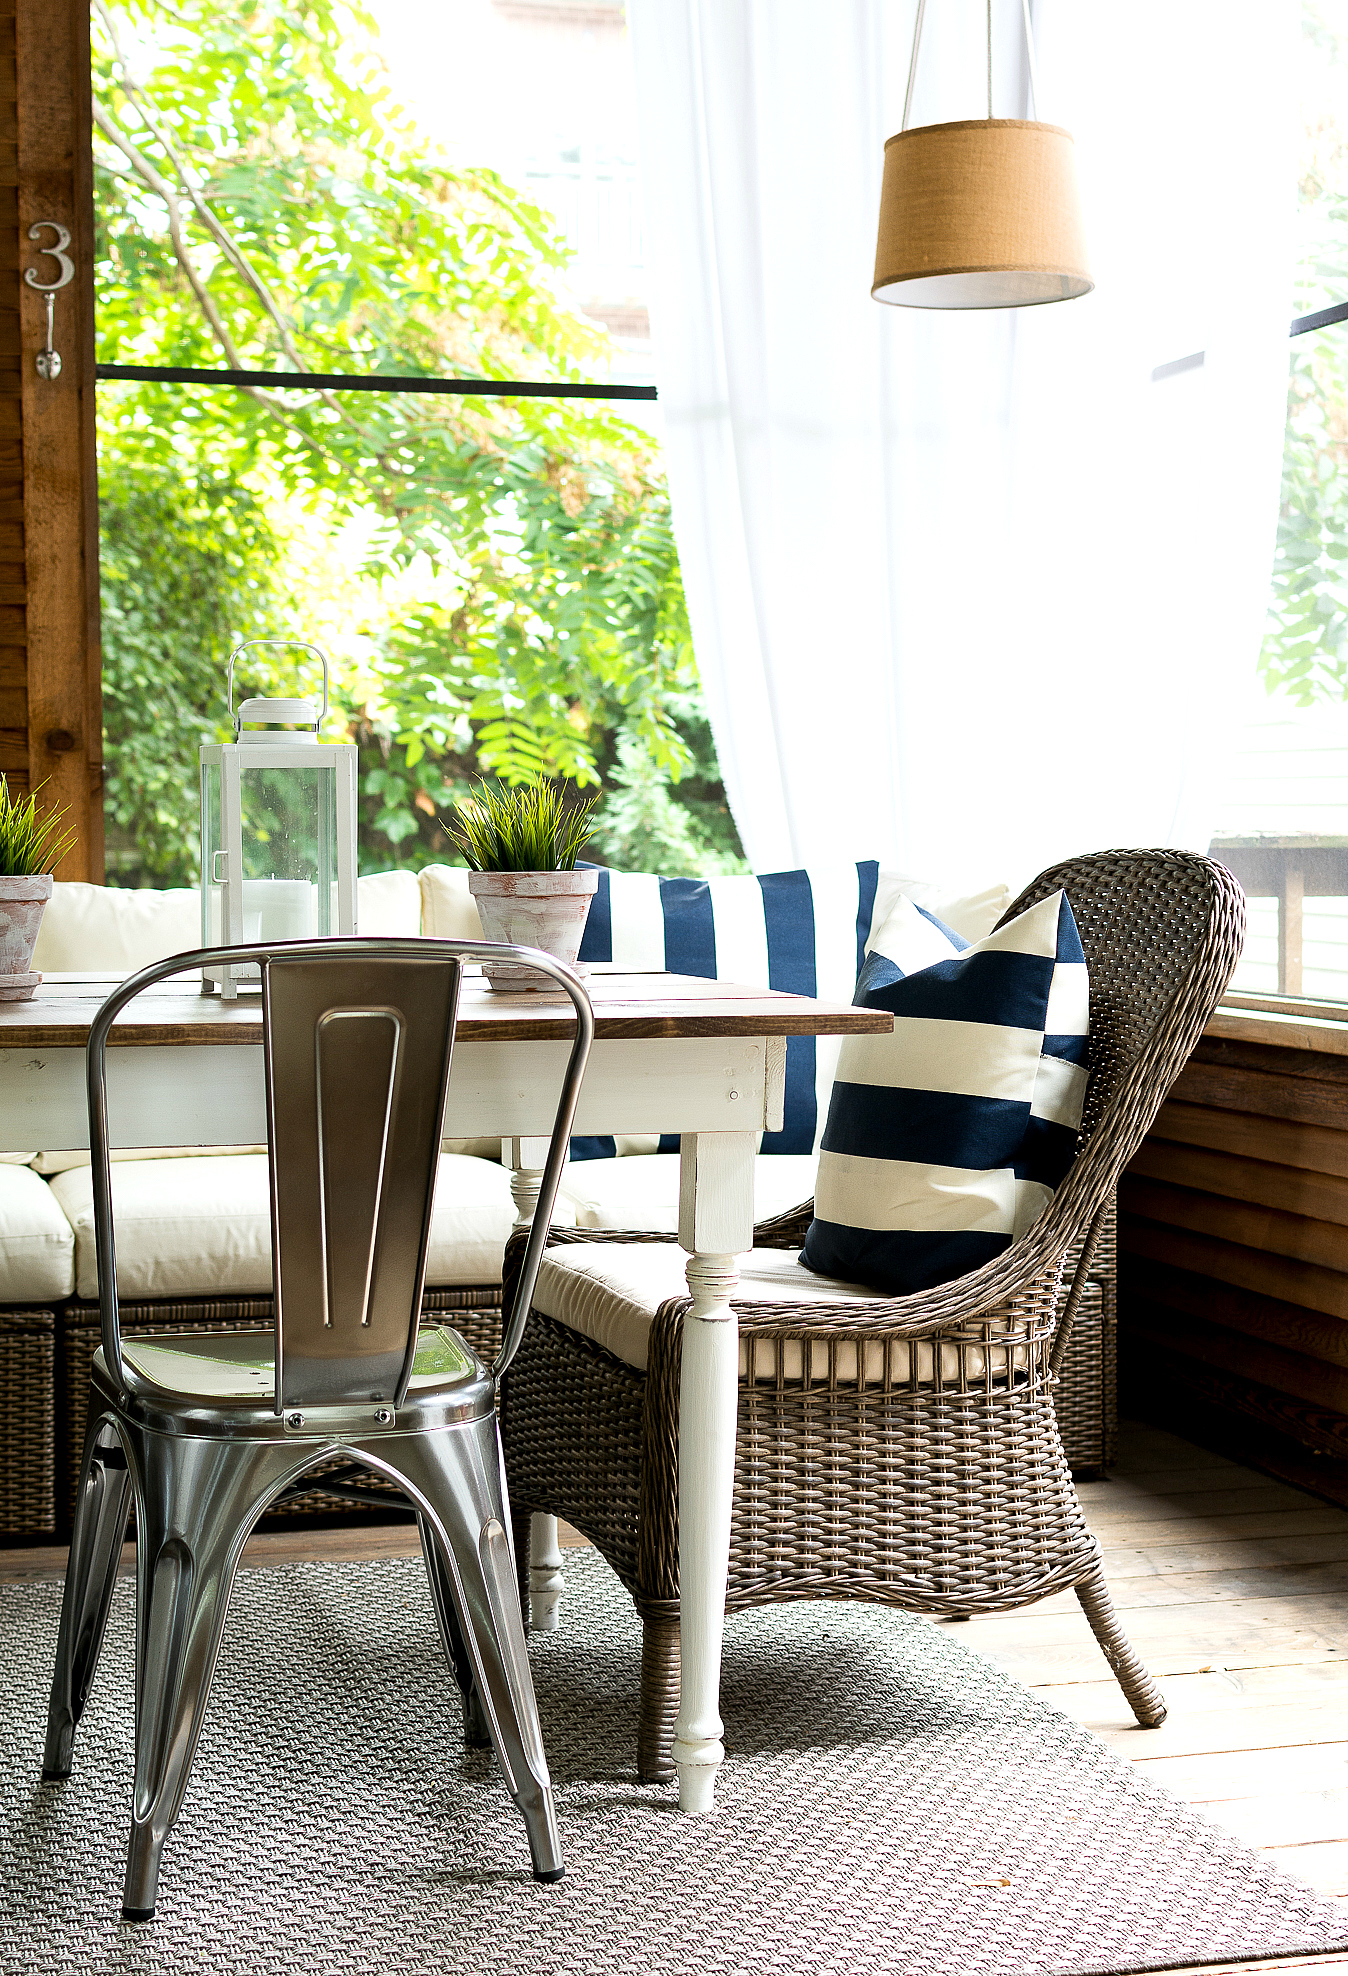 Wicker Chairs with Farmhouse Table